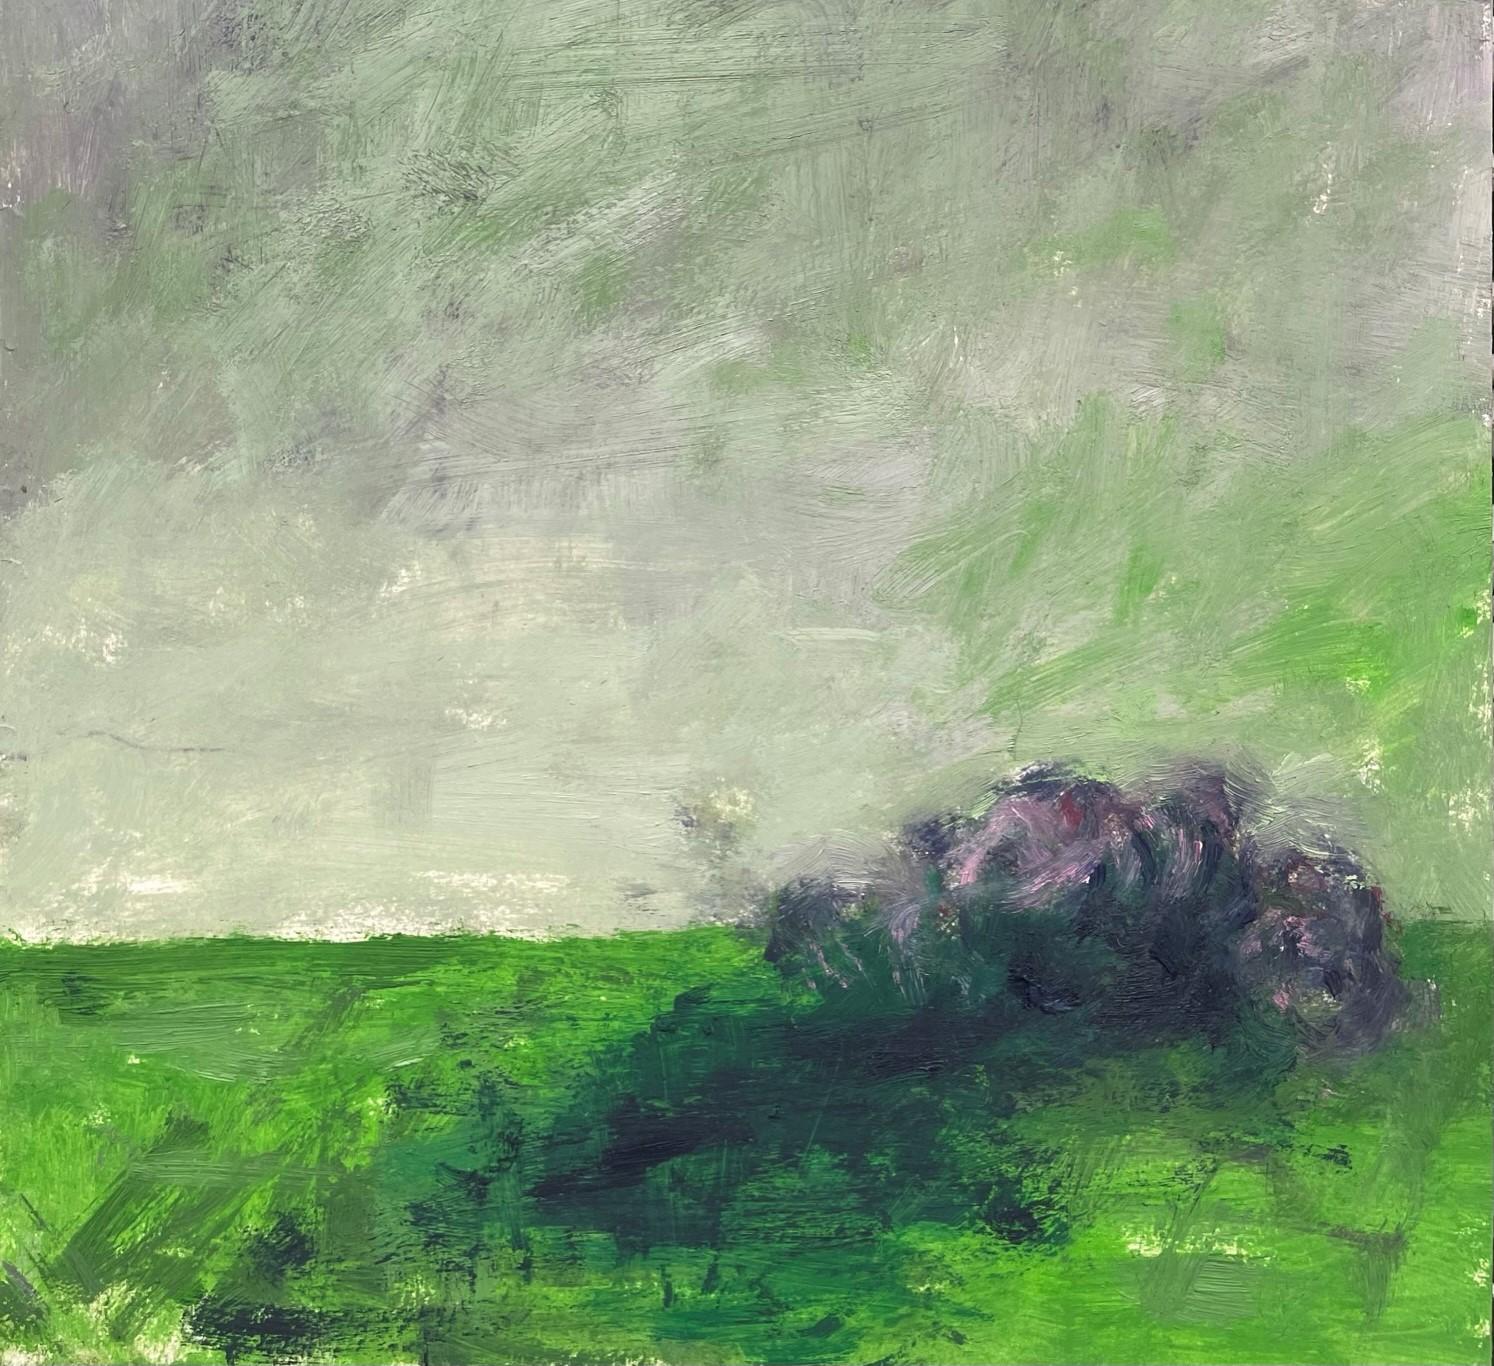 Remains (Body in the Field 15) - Contemporary, Abstract, Green, 21st Century - Abstract Expressionist Art by Zsolt Berszán